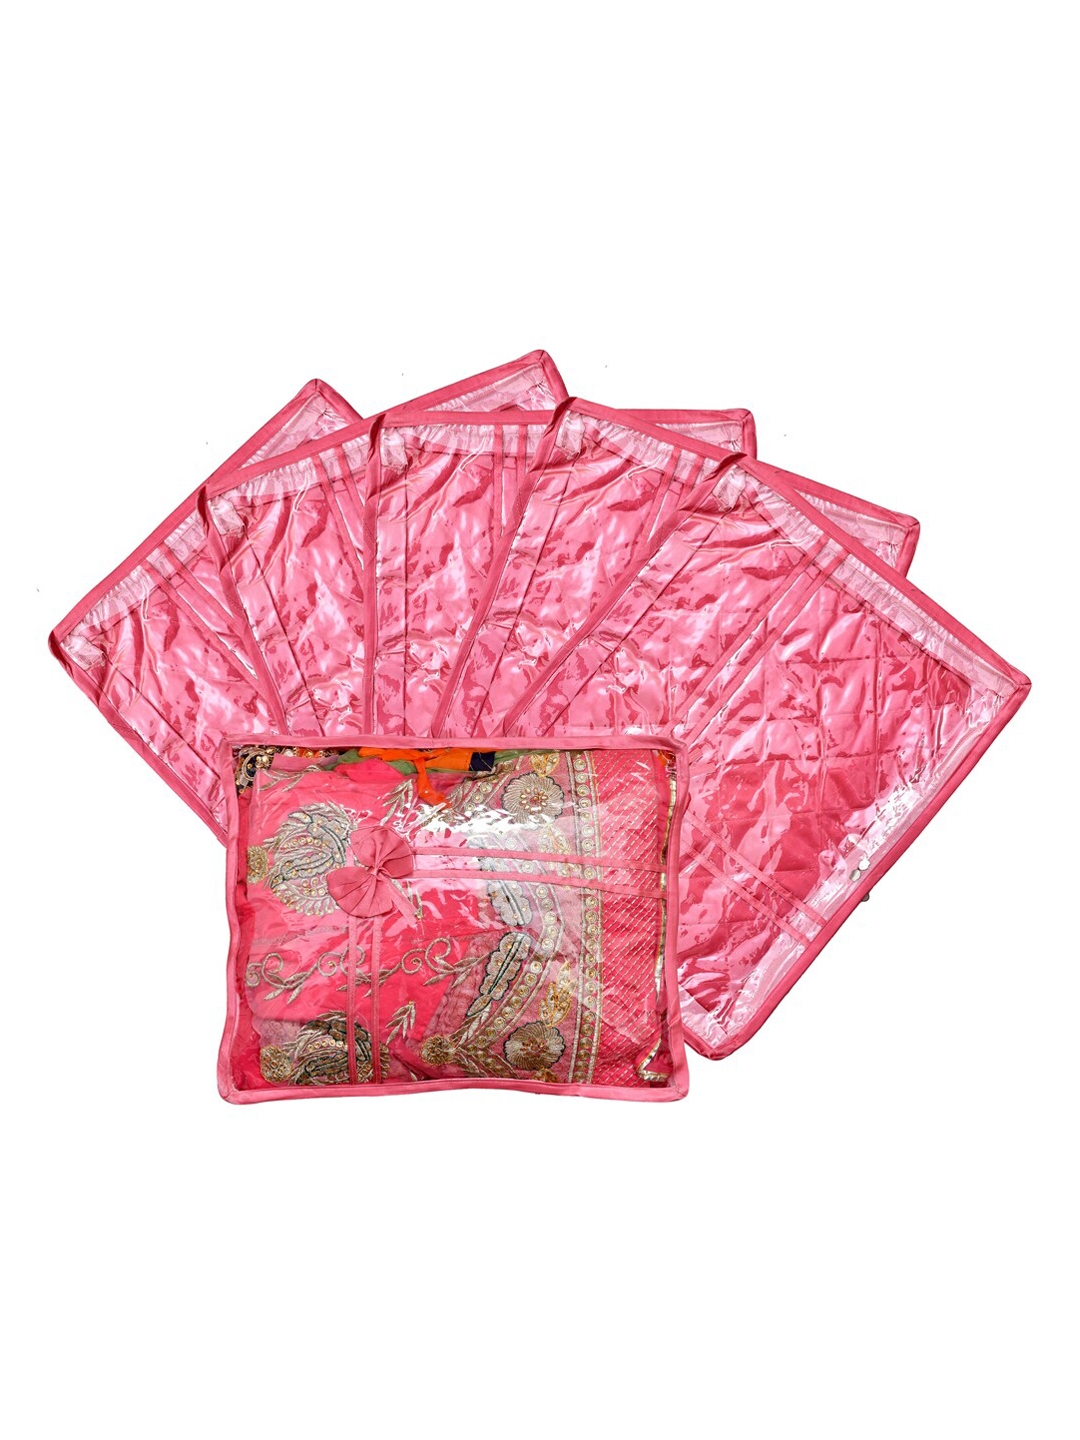 Kuber Industries Set Of 6 Pink Solid Single Packing Saree Cover Organizer